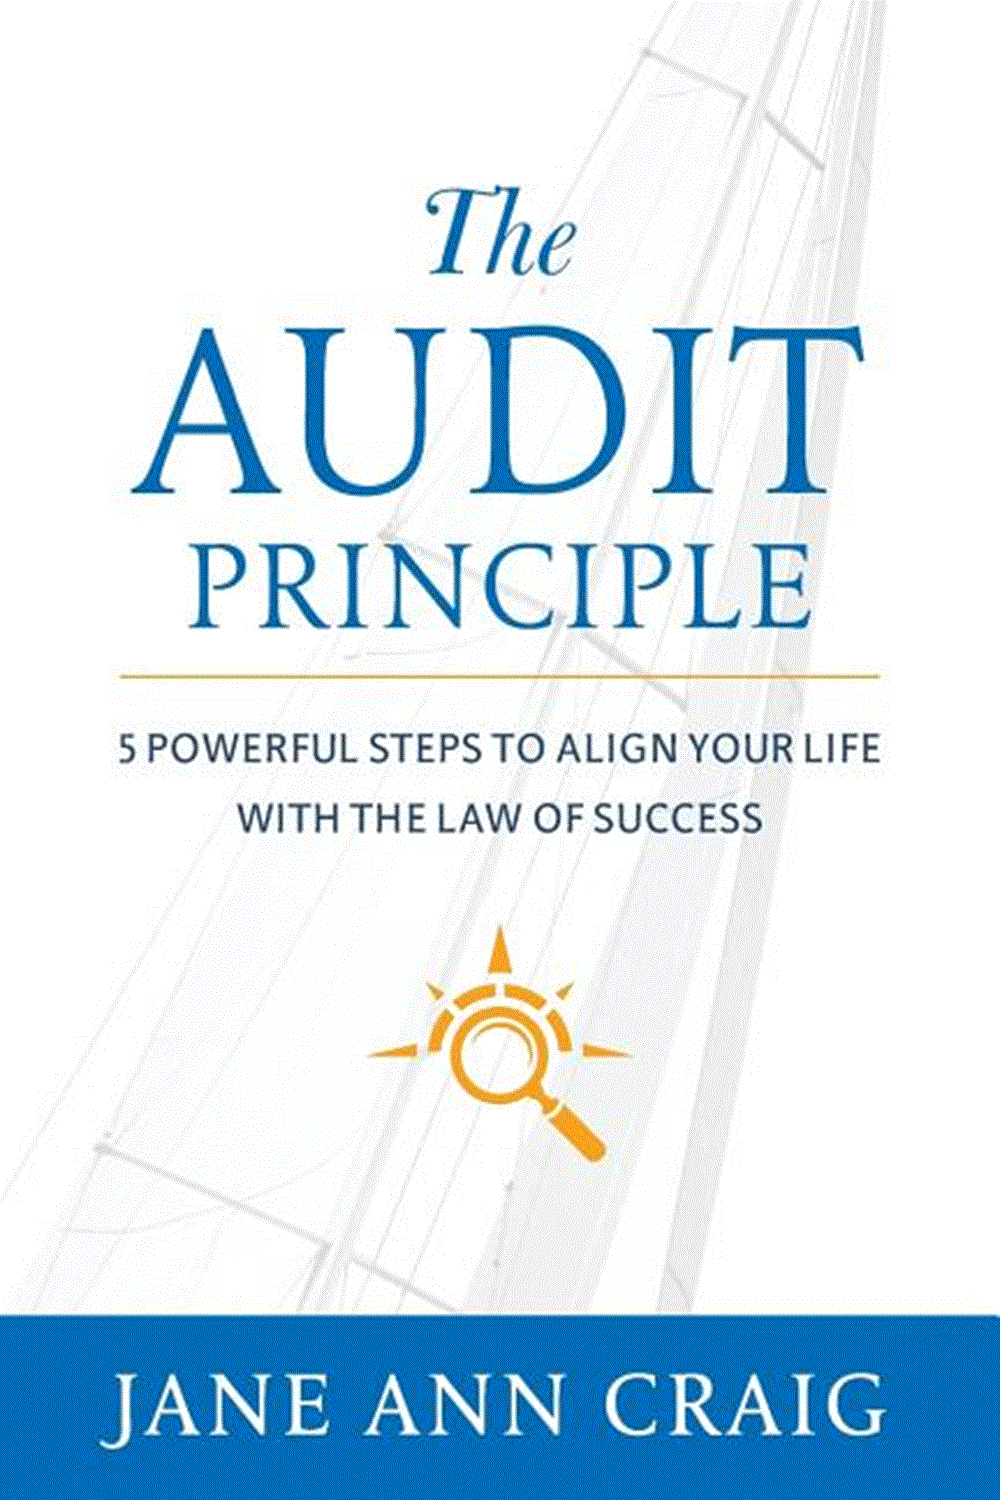 Audit Principle: 5 Powerful Steps to Align Your Life with the Laws of Success